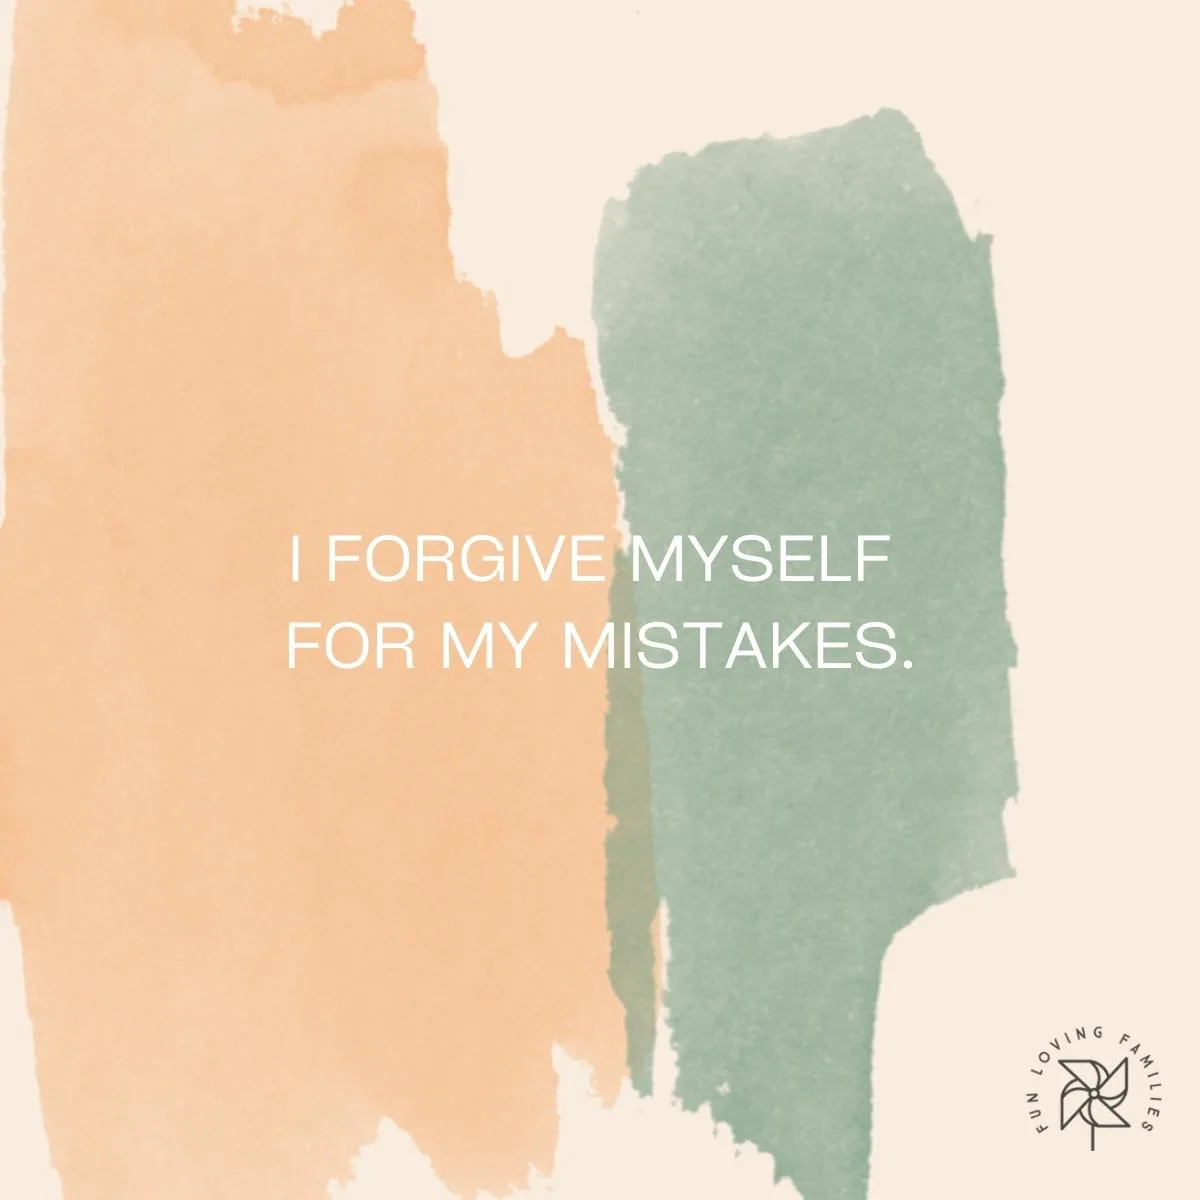 I forgive myself for my mistakes affirmations